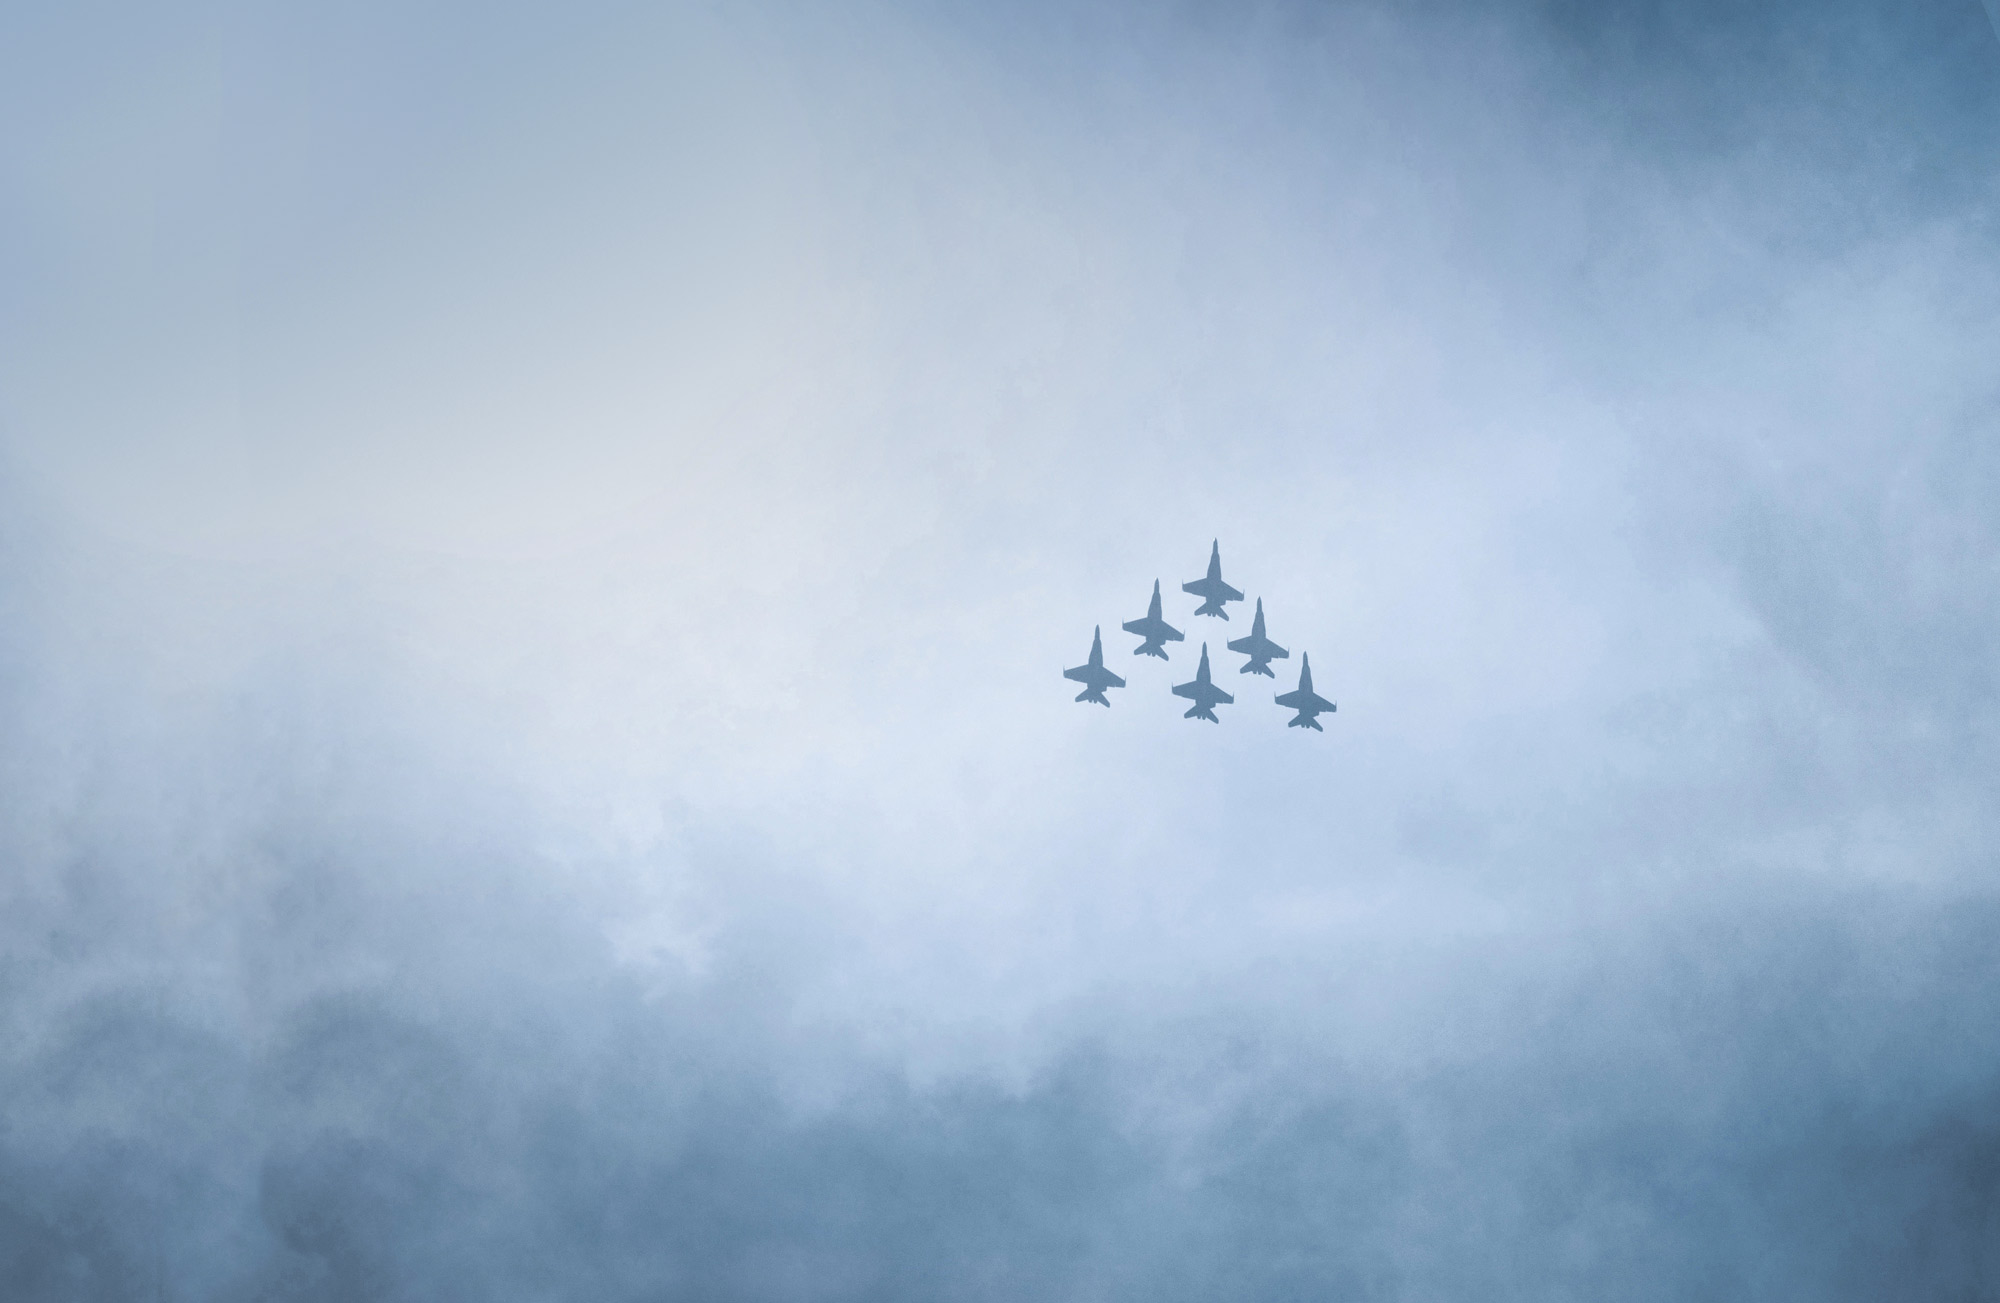 defence header picture, showing the sky with 6 planes